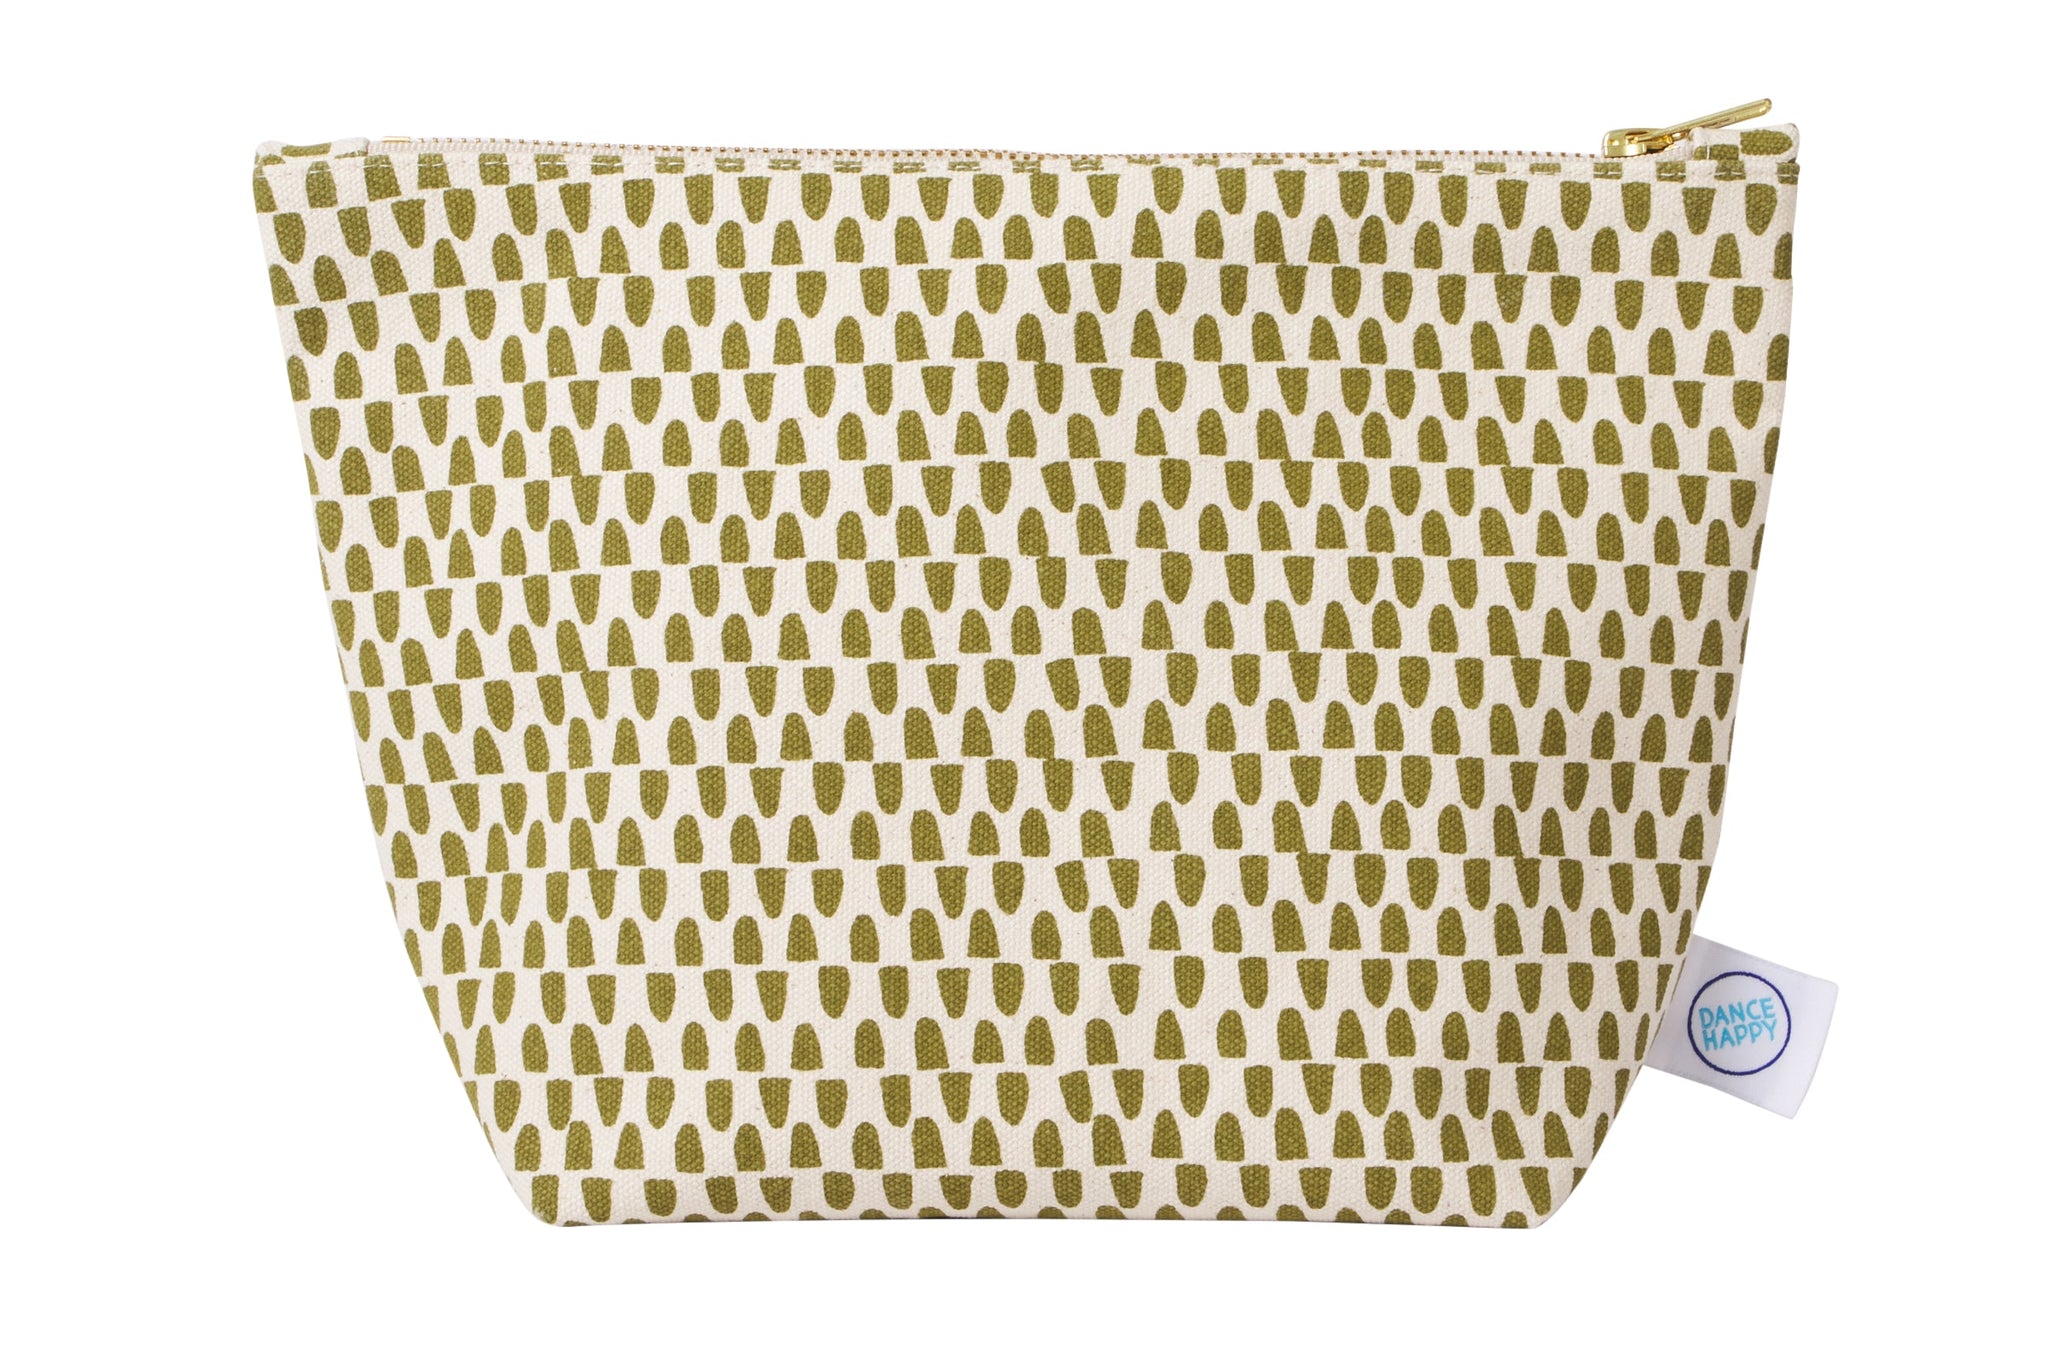 Avery Cosmetic Bag (Unlined)